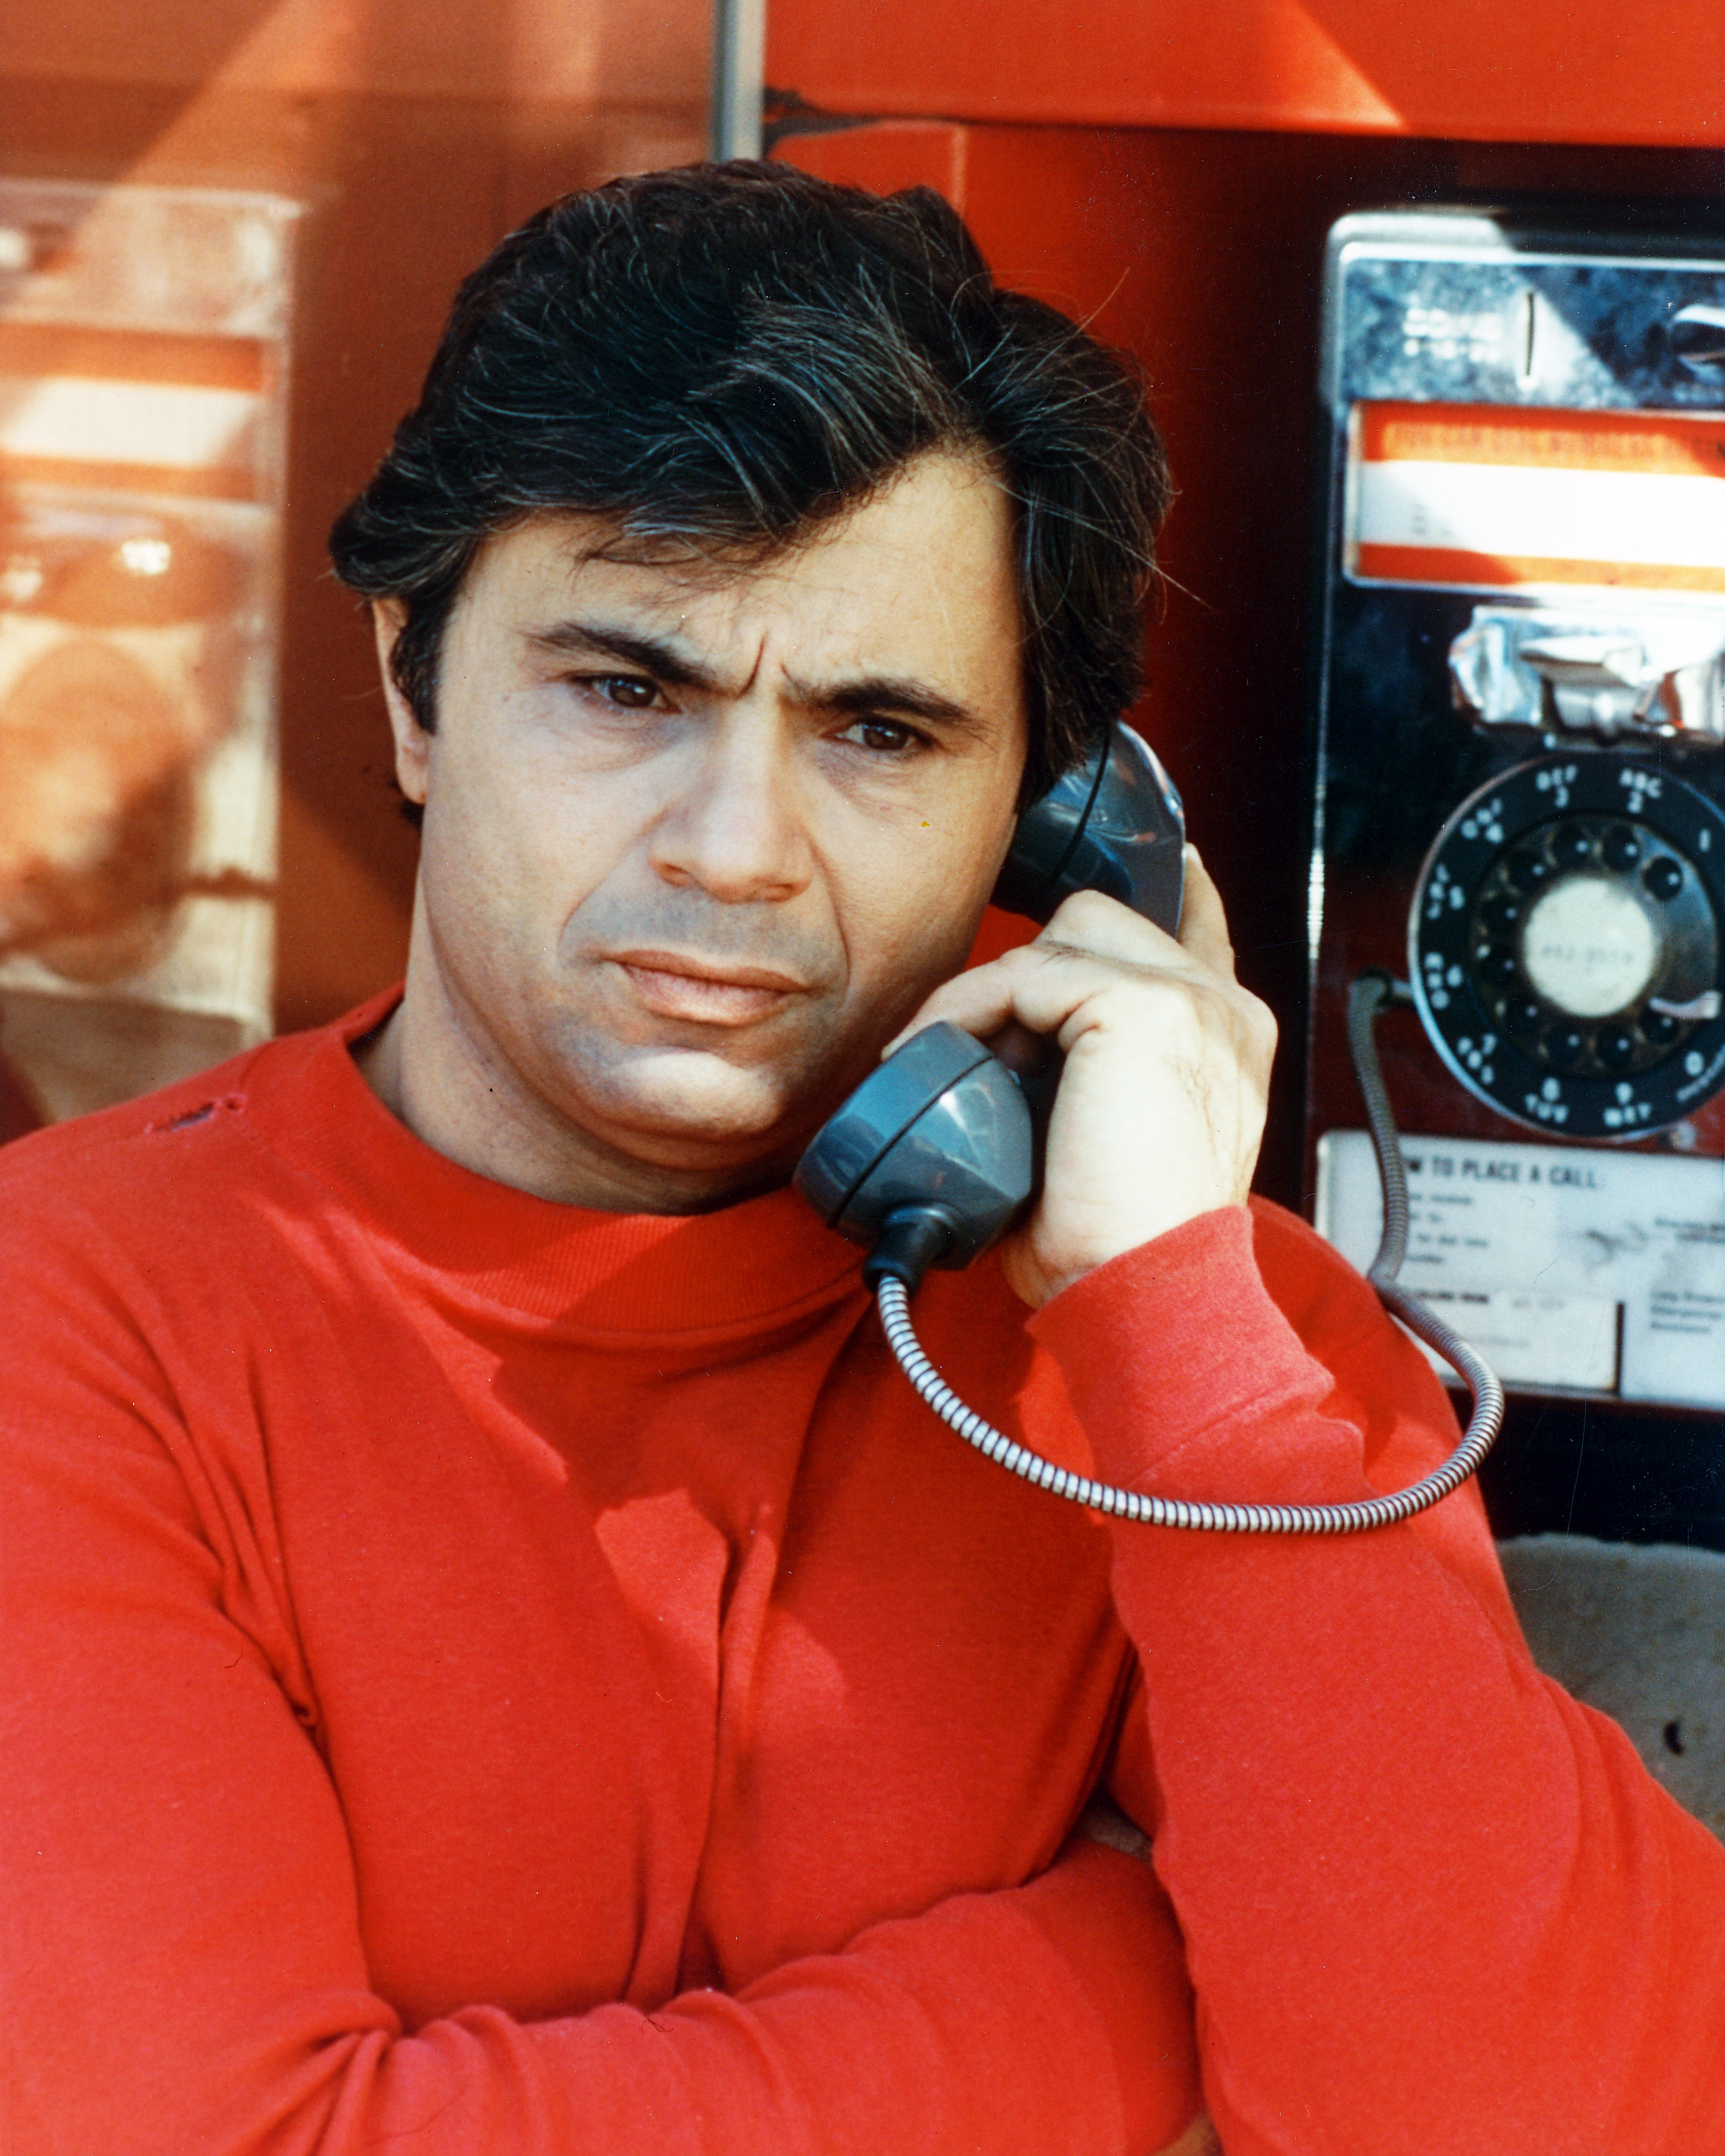 Publicity portrait of Robert Blake, 1976 | Source: Getty Images